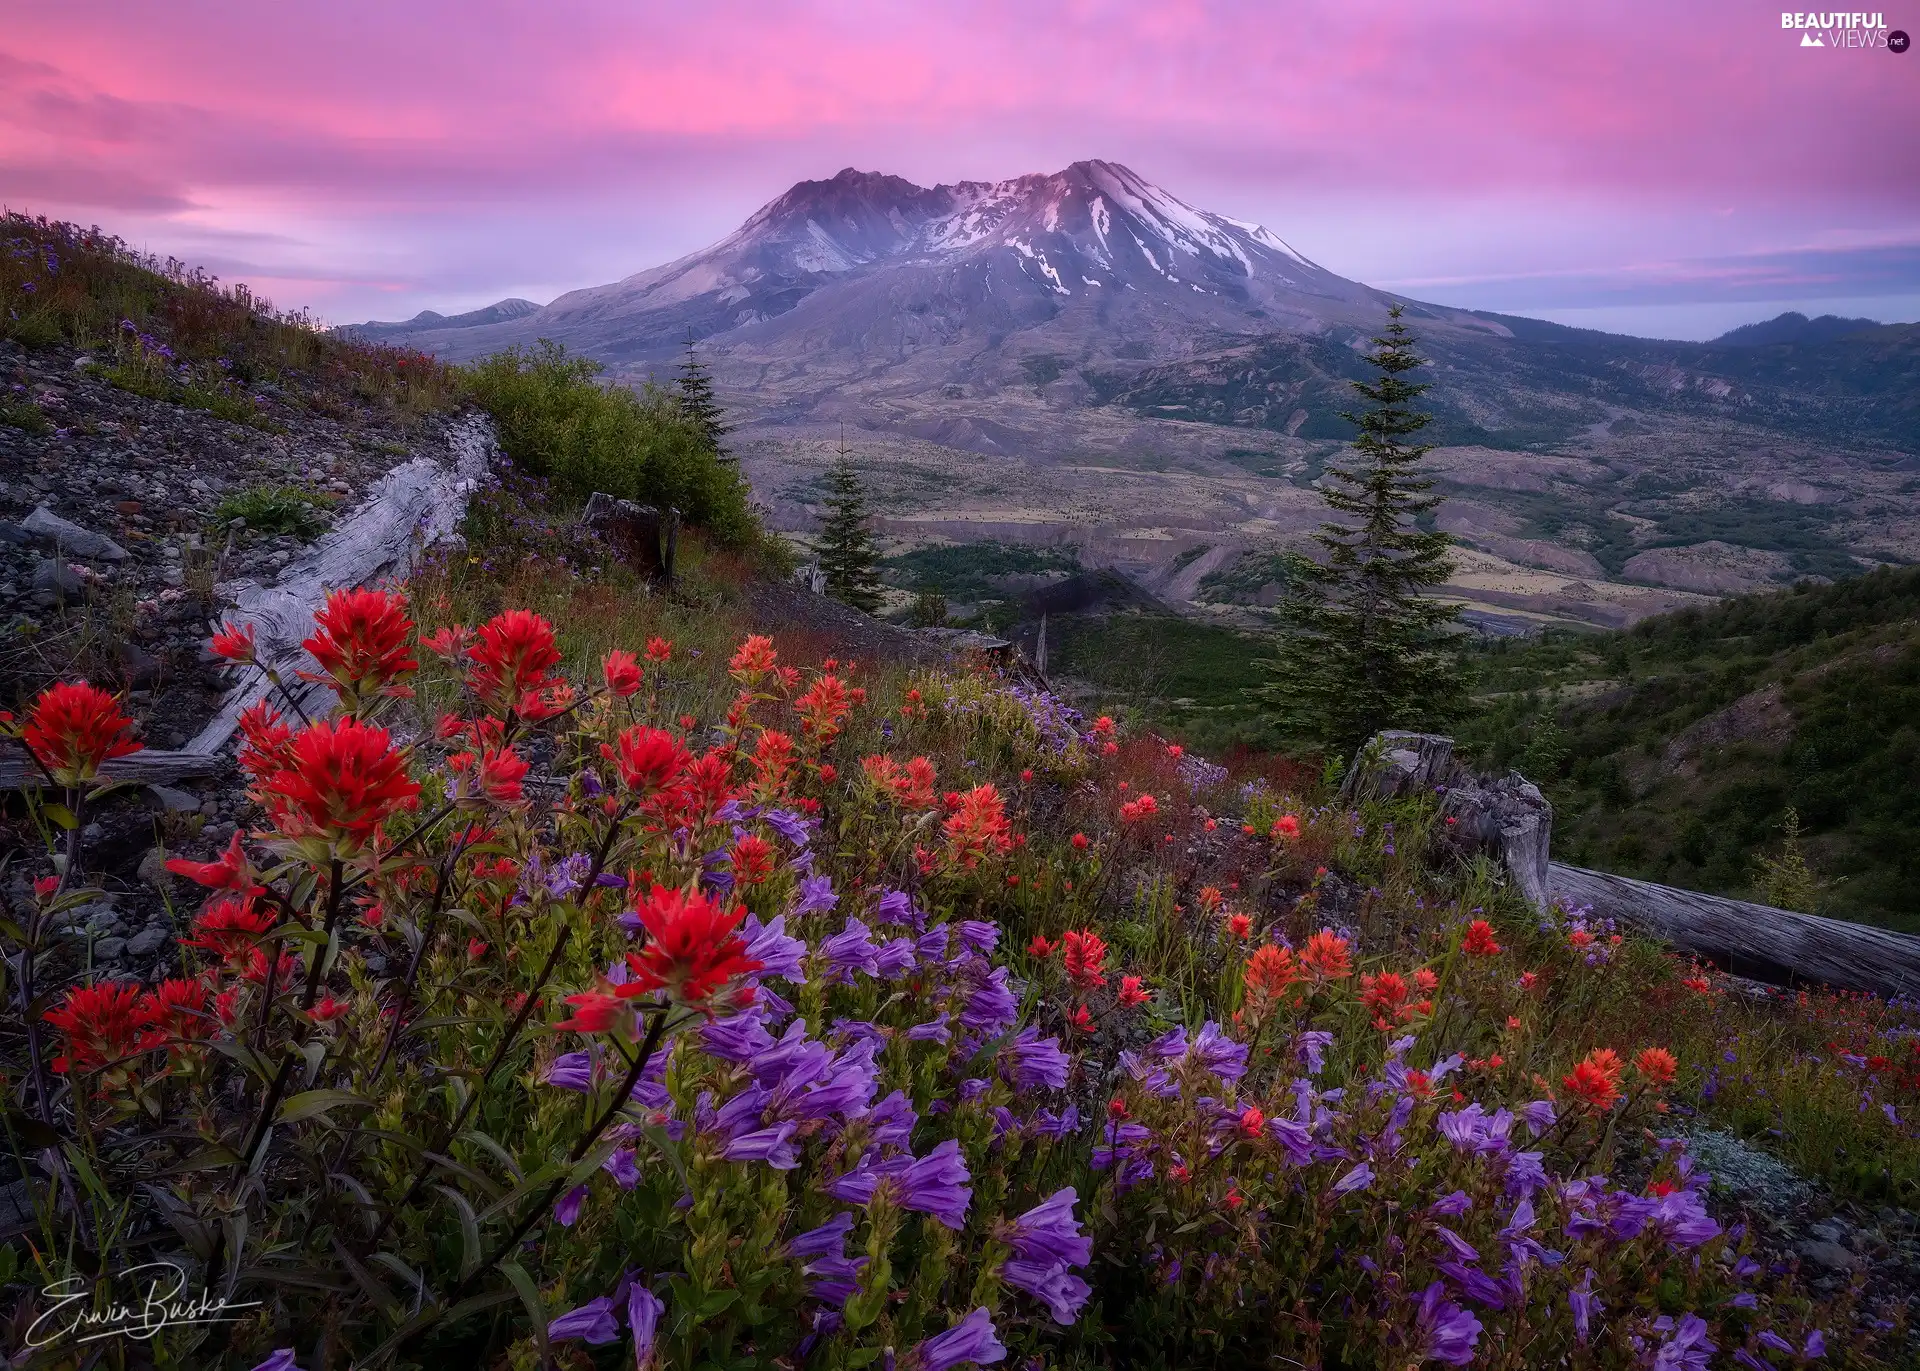 trees, mountains, Meadow, viewes, Indian Paintbrush, The United States, Washington State, Volcano Mount St. Helens, Cascade Mountains, Sunrise, Flowers